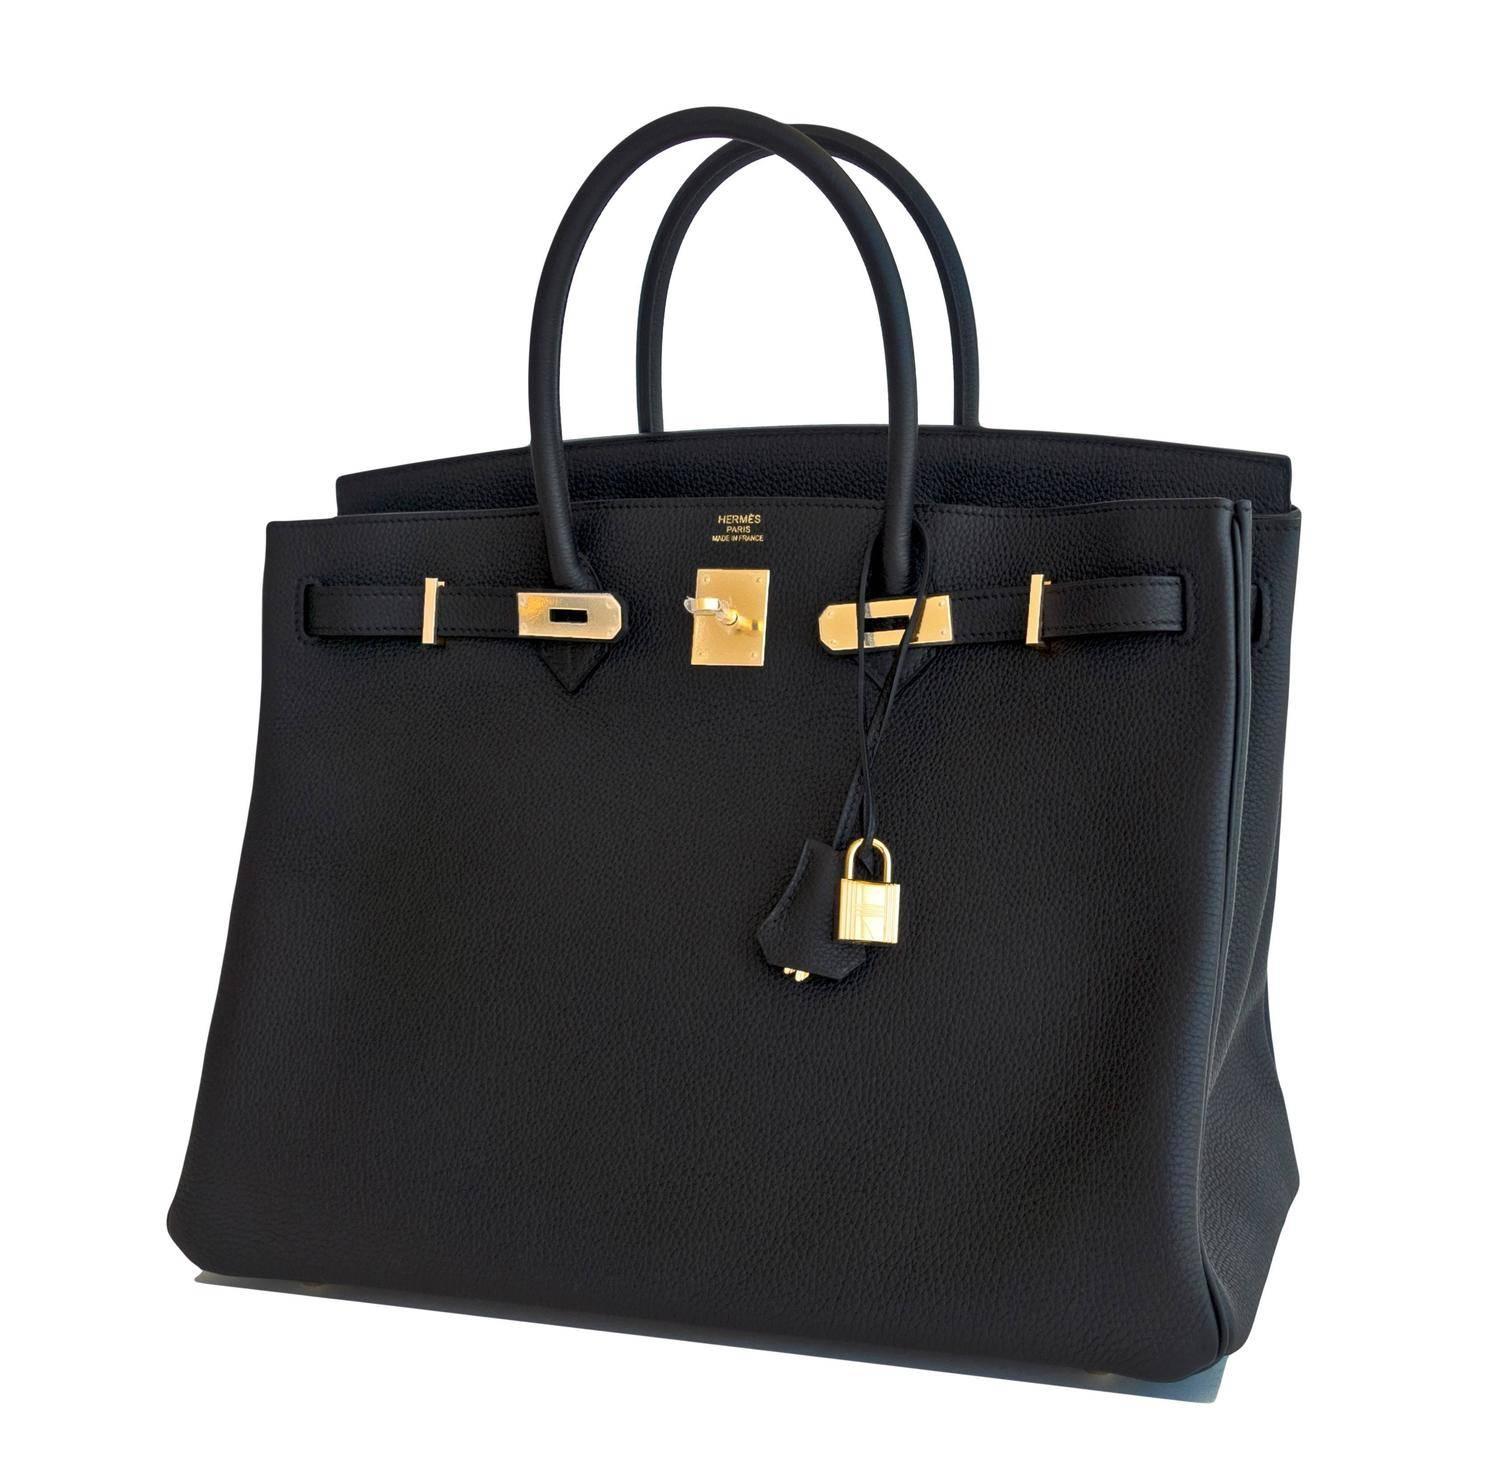 Hermes Birkin 40cm Black Togo Gold Hardware Power Birkin RARE 
Brand New in Box. Store fresh. Pristine Condition (with plastic on hardware). 
Perfect gift! Comes with lock, keys, clochette, sleeper, raincoat, and orange Hermes box. 
Here it is - the